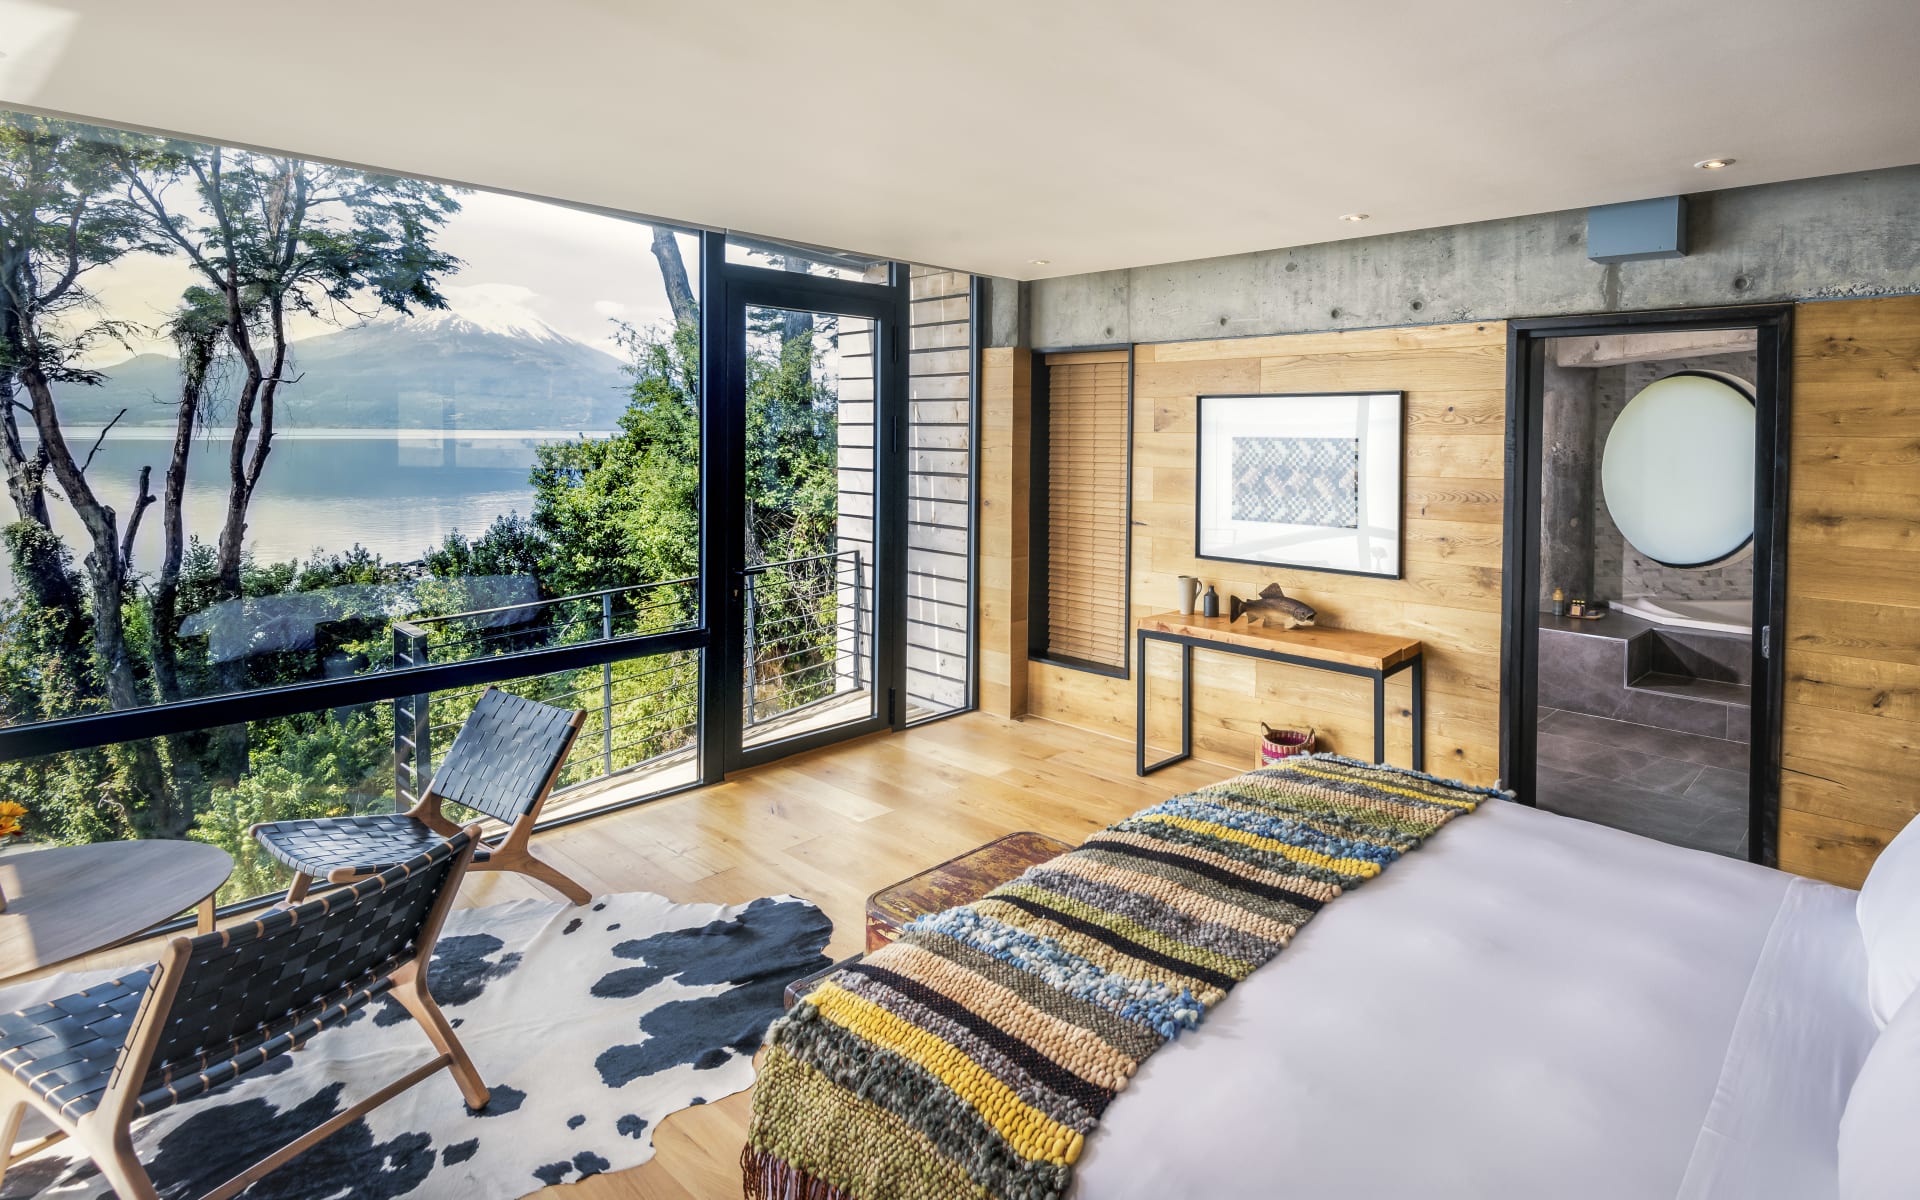 A large bed with a colourful blanket looks out of a floor-to-ceiling window onto the lake.